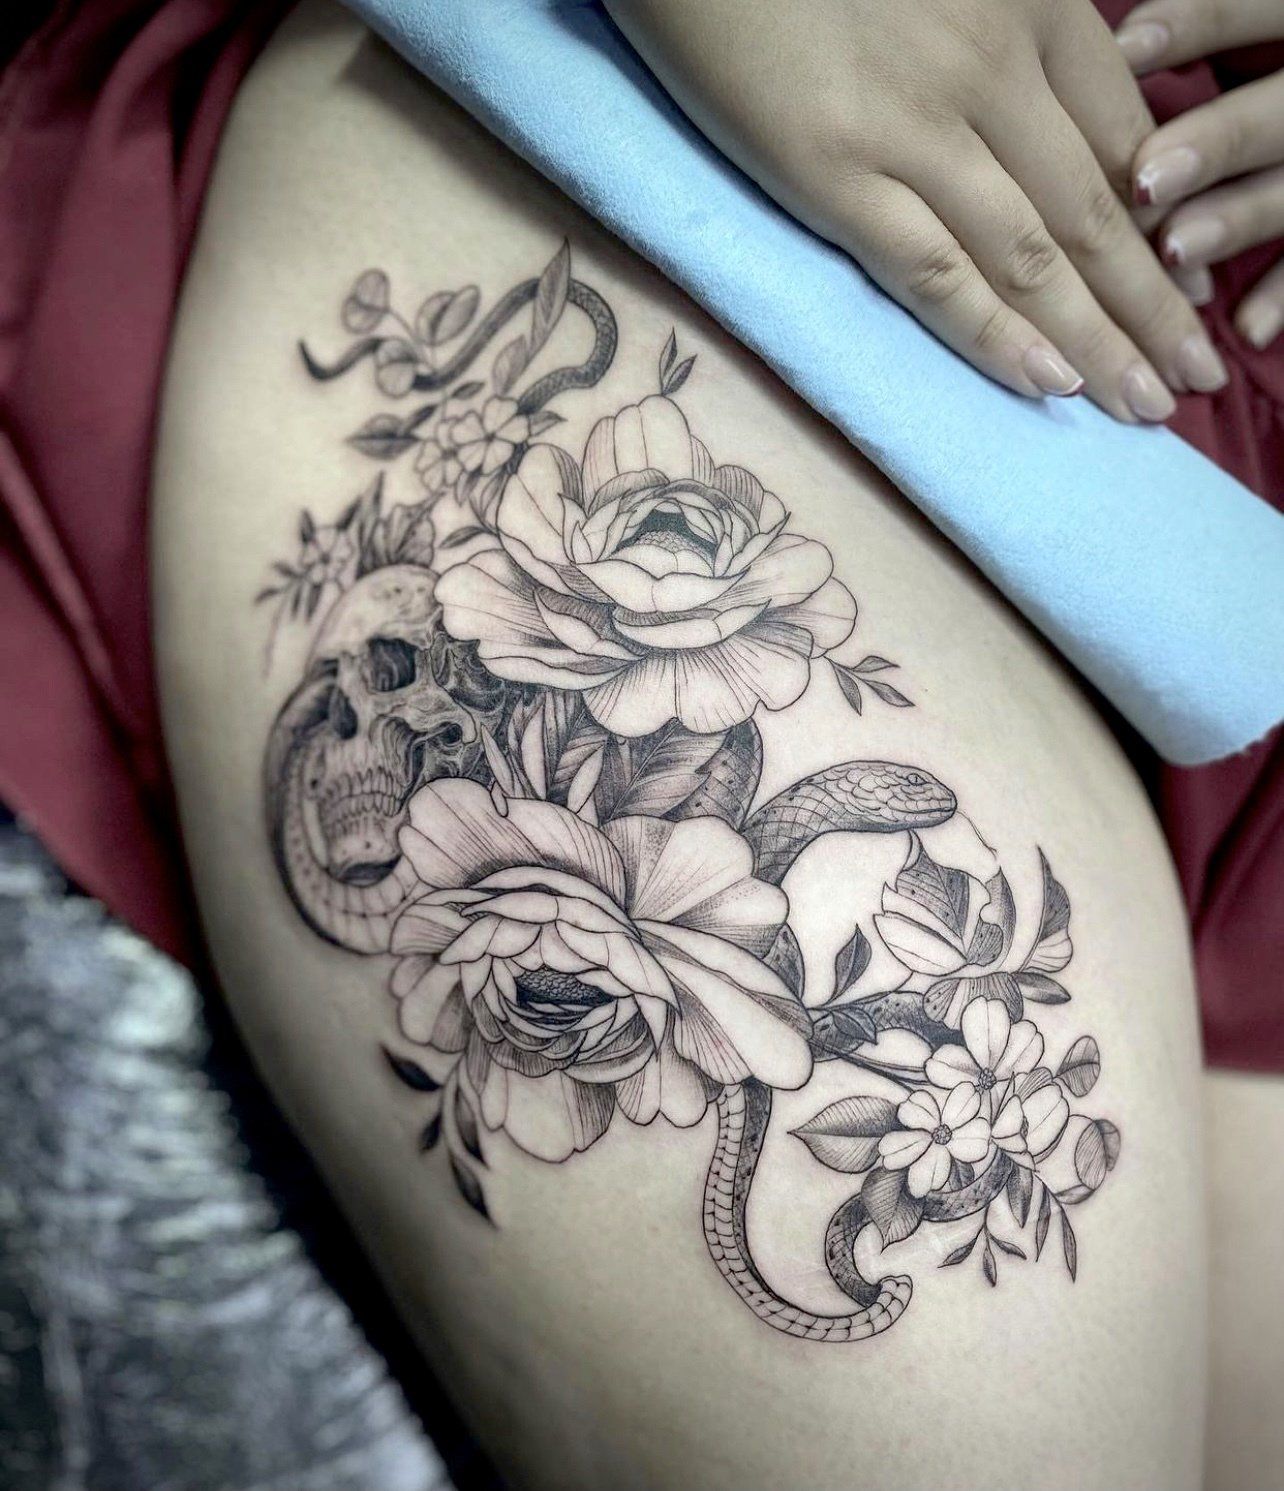 a woman has a tattoo of flowers and a snake on her thigh